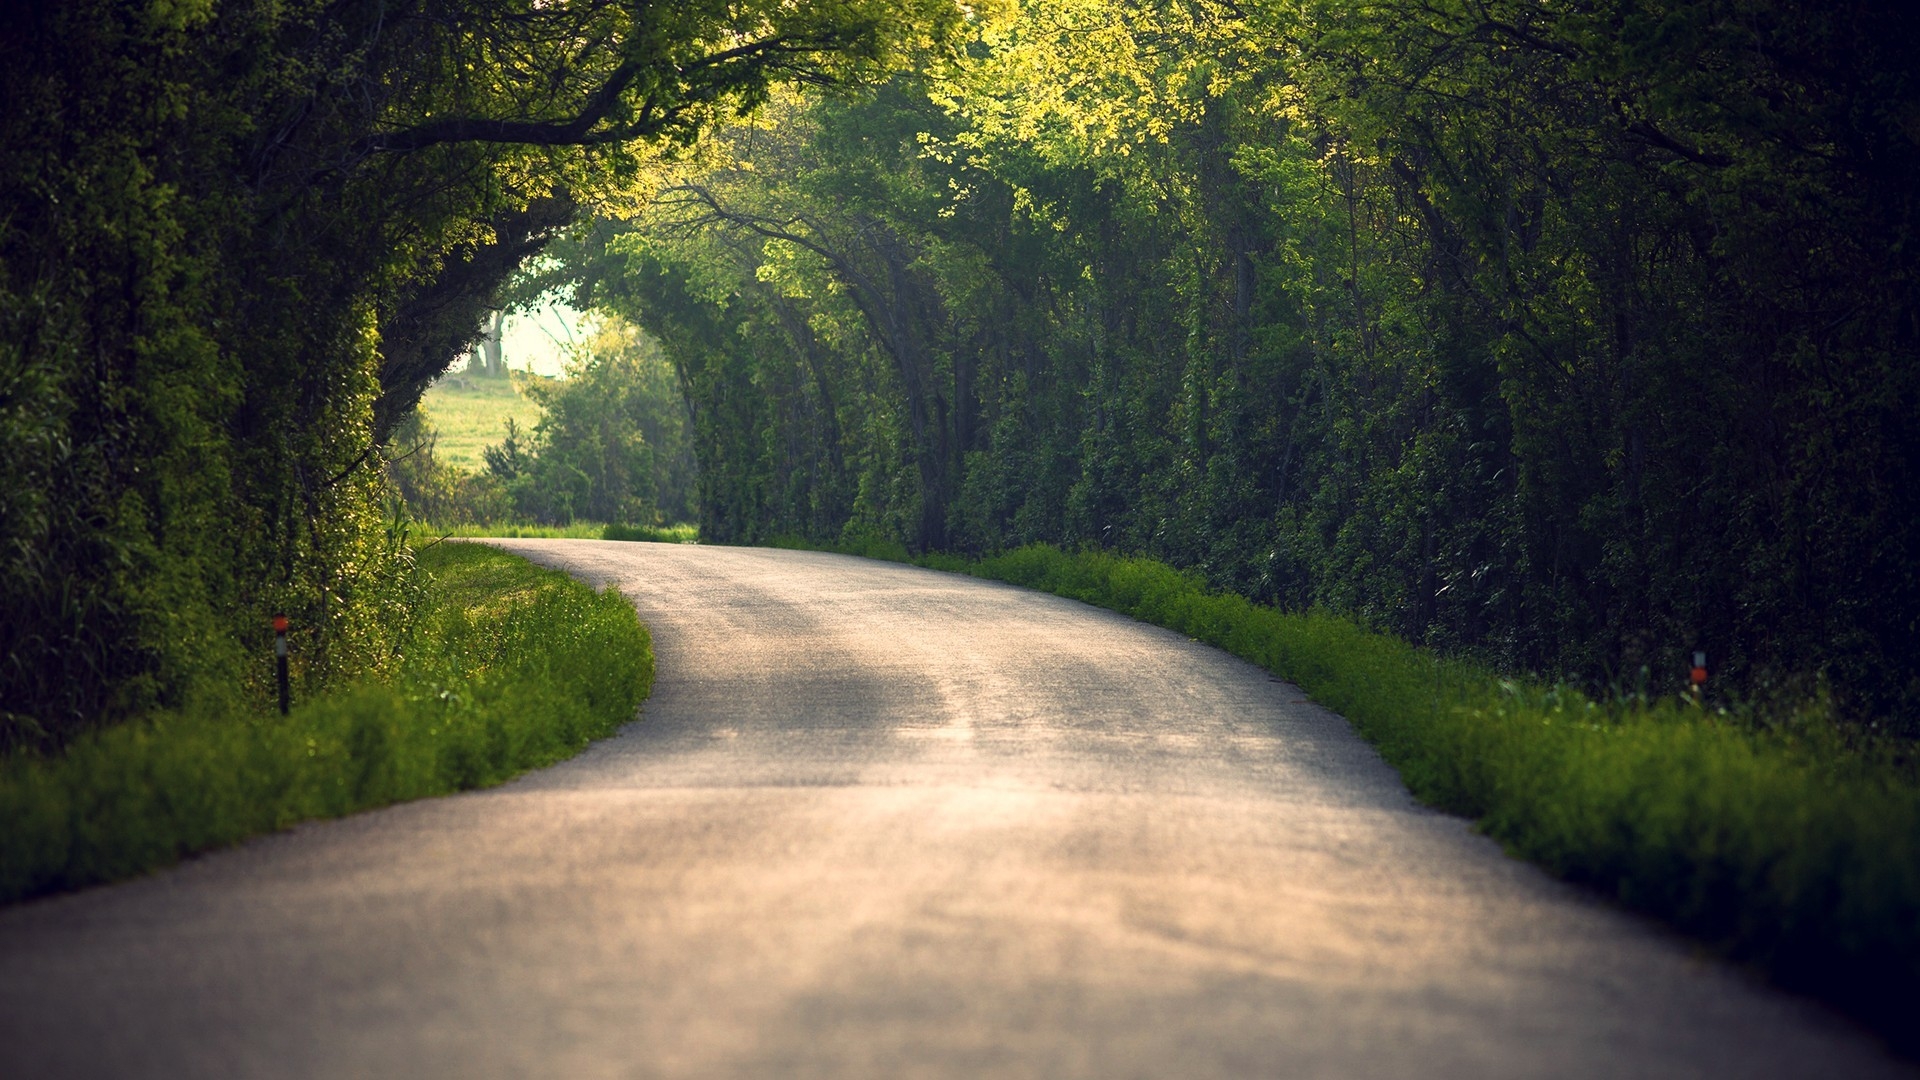 Download Wallpaper 1920x1080 summer, nature, road, leaves, trees ...